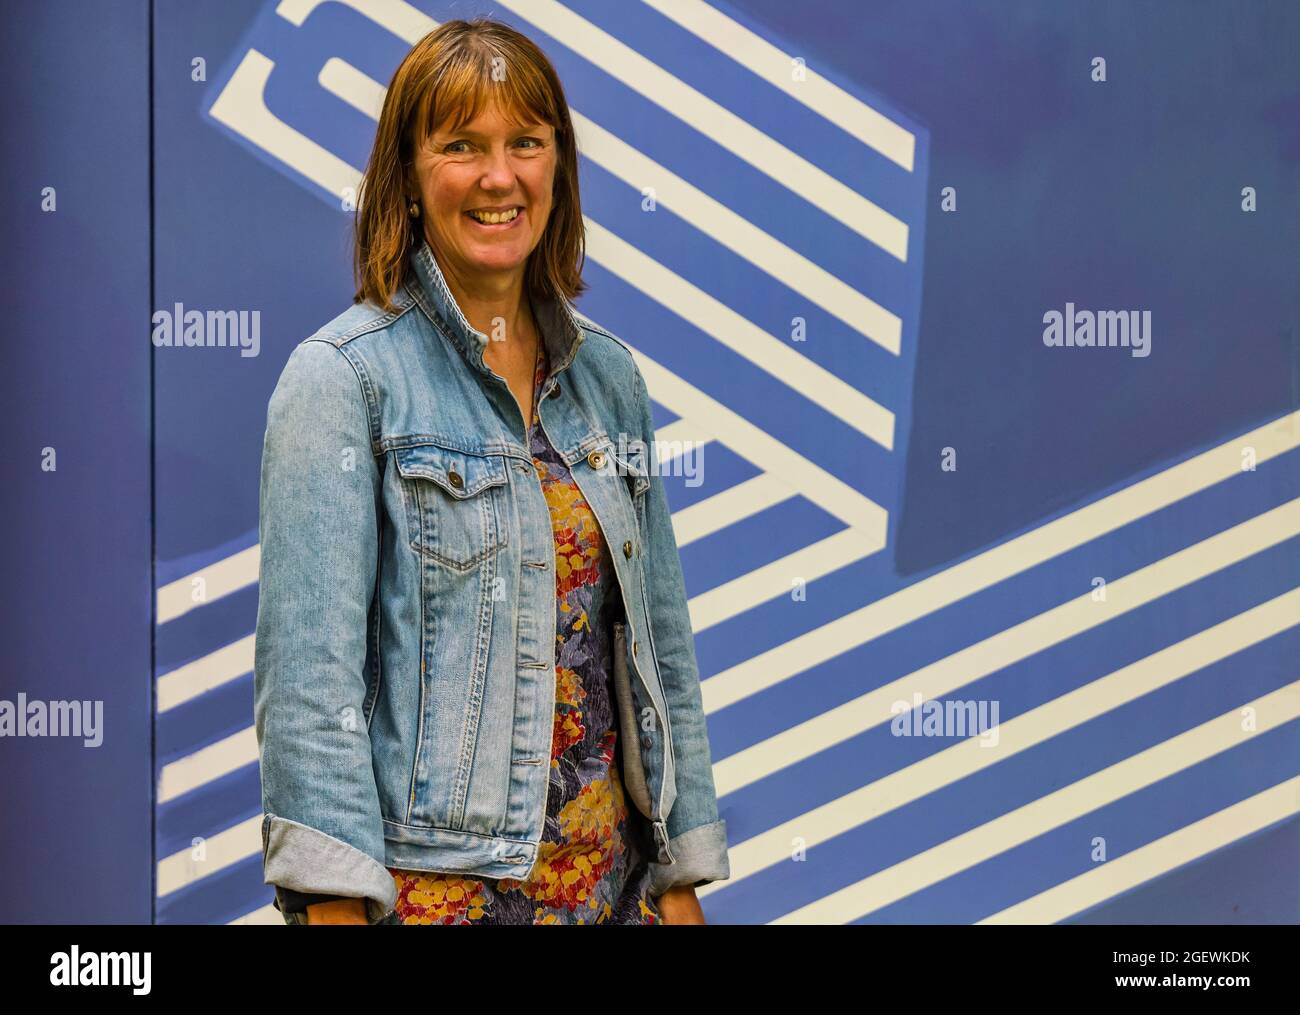 Edinburgh, Scotland, United Kingdom, 21st August 2021. Edinburgh International Book Festival: Pictured: Kathleen Jamie, poet and academic at the book festival today after the announcement of her appointment as Makar, Scotland’s national poet Stock Photo